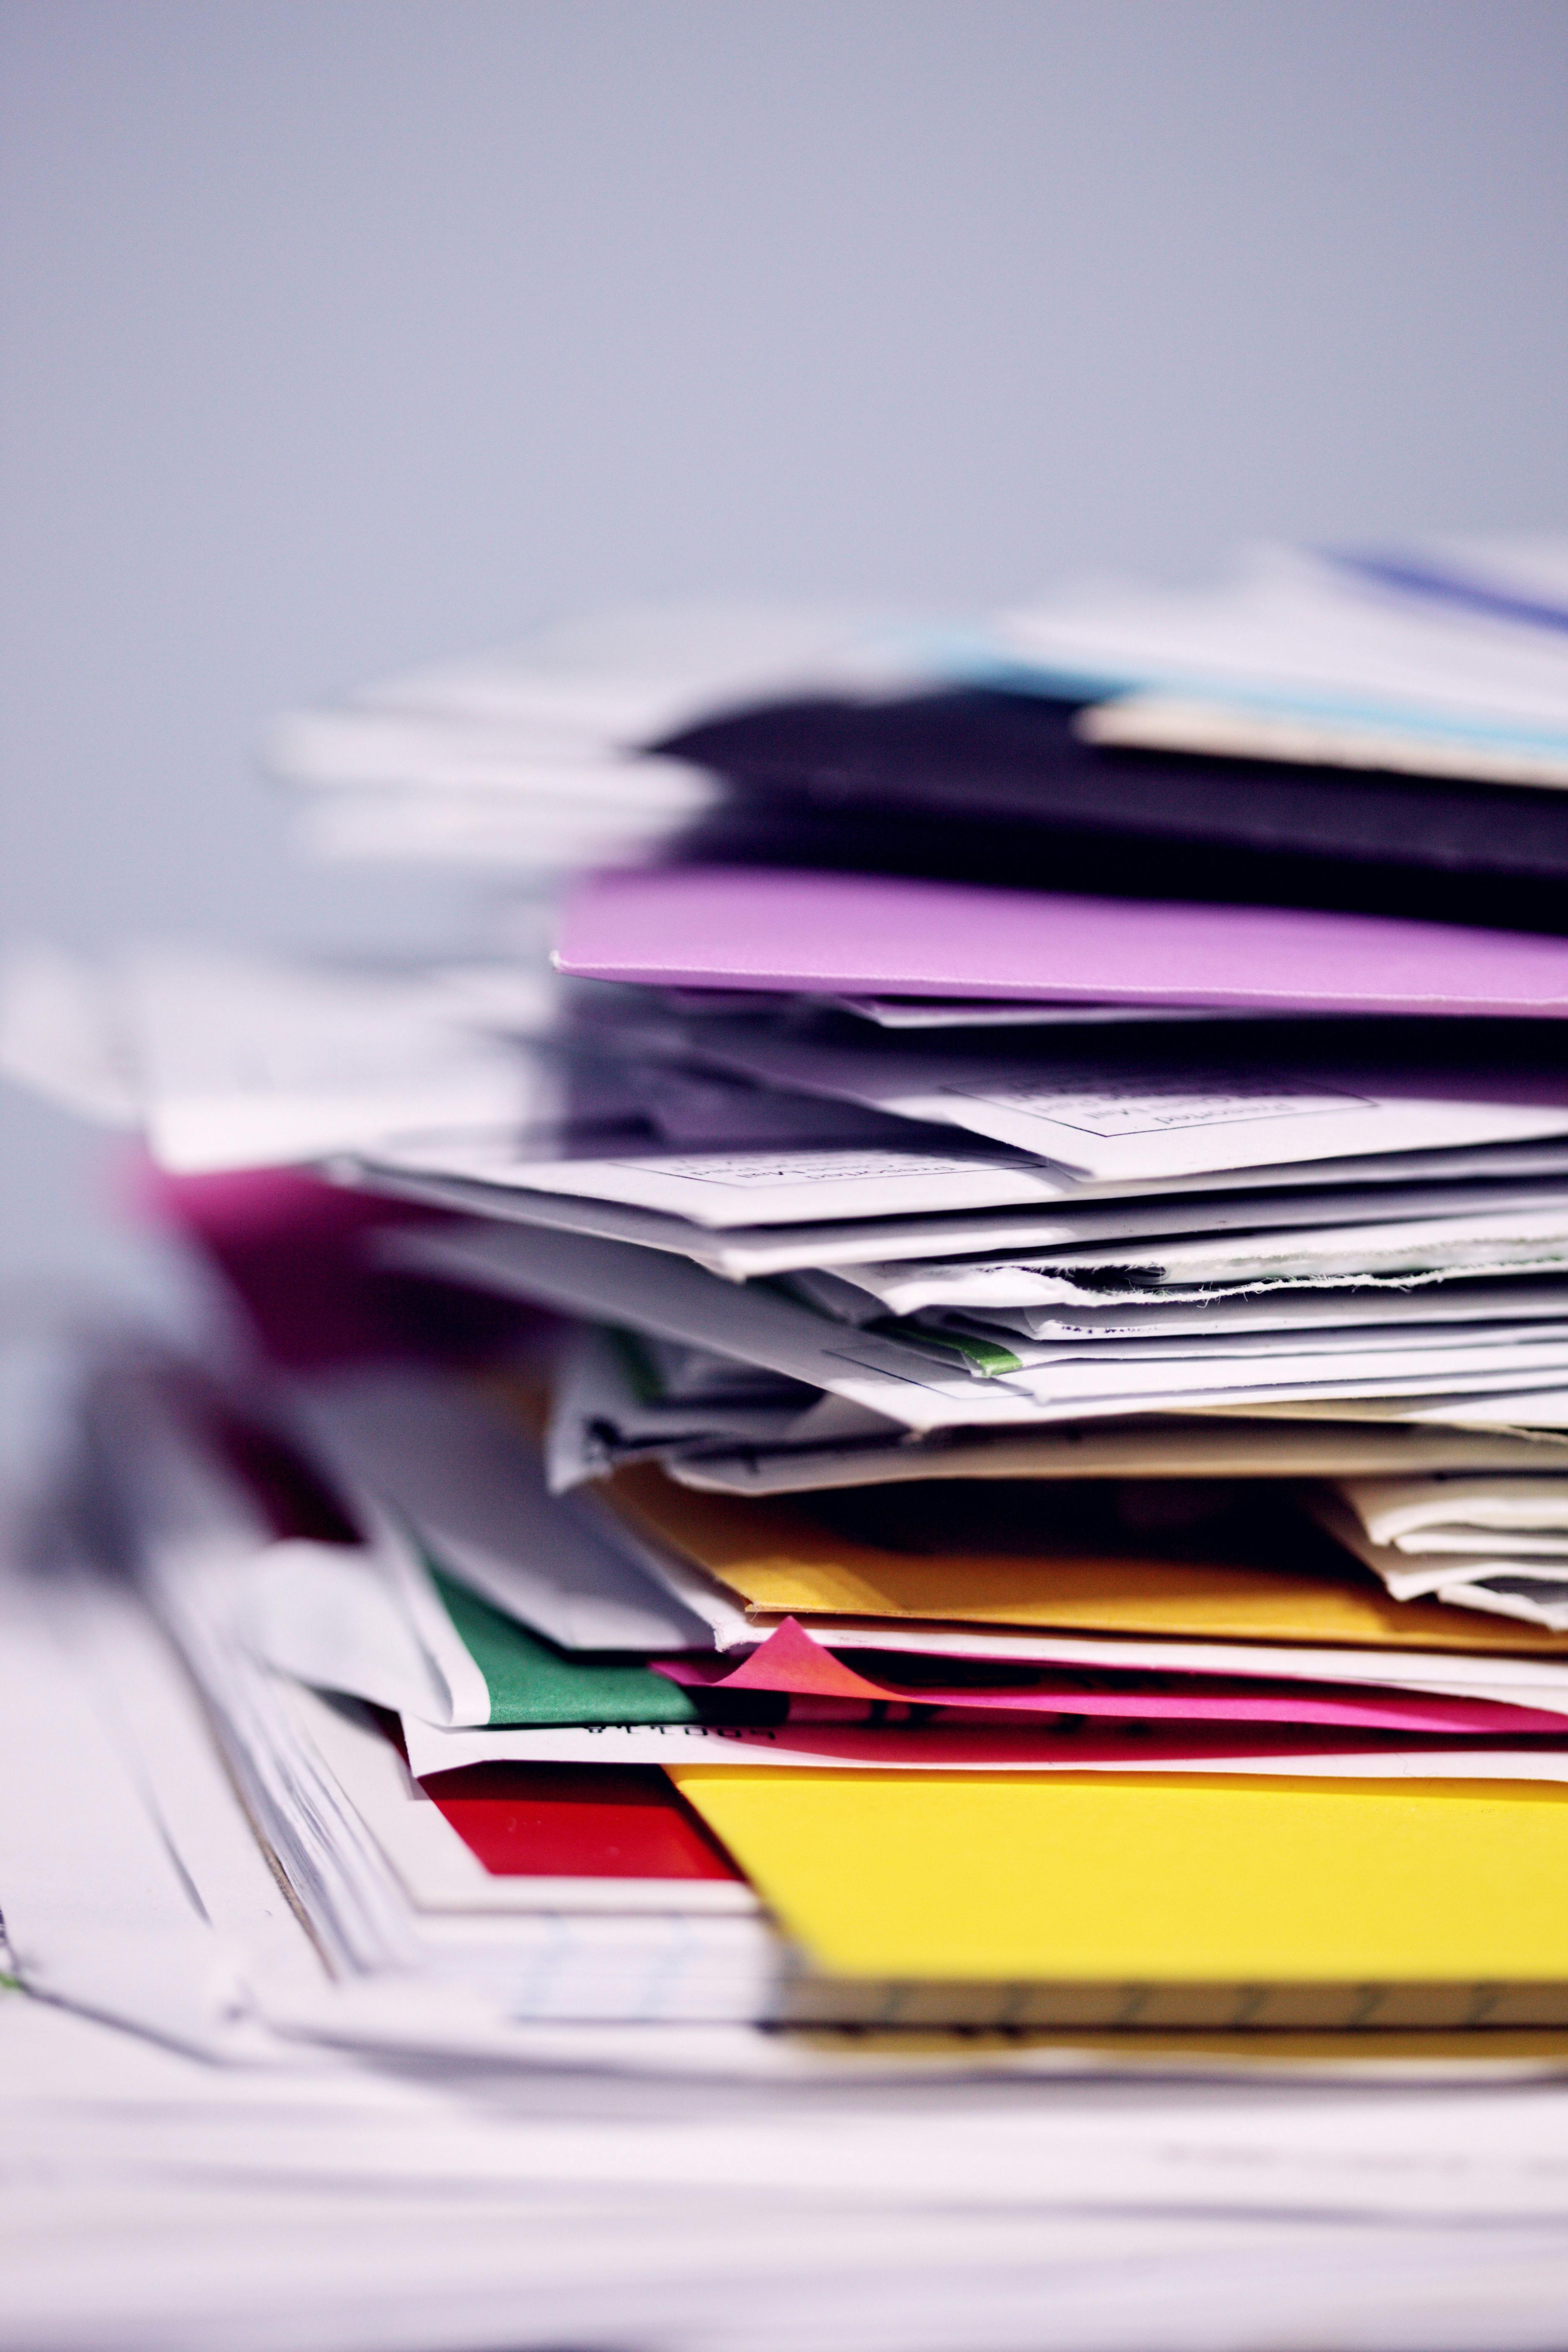 a pile of papers with colorful file folders intermingled.